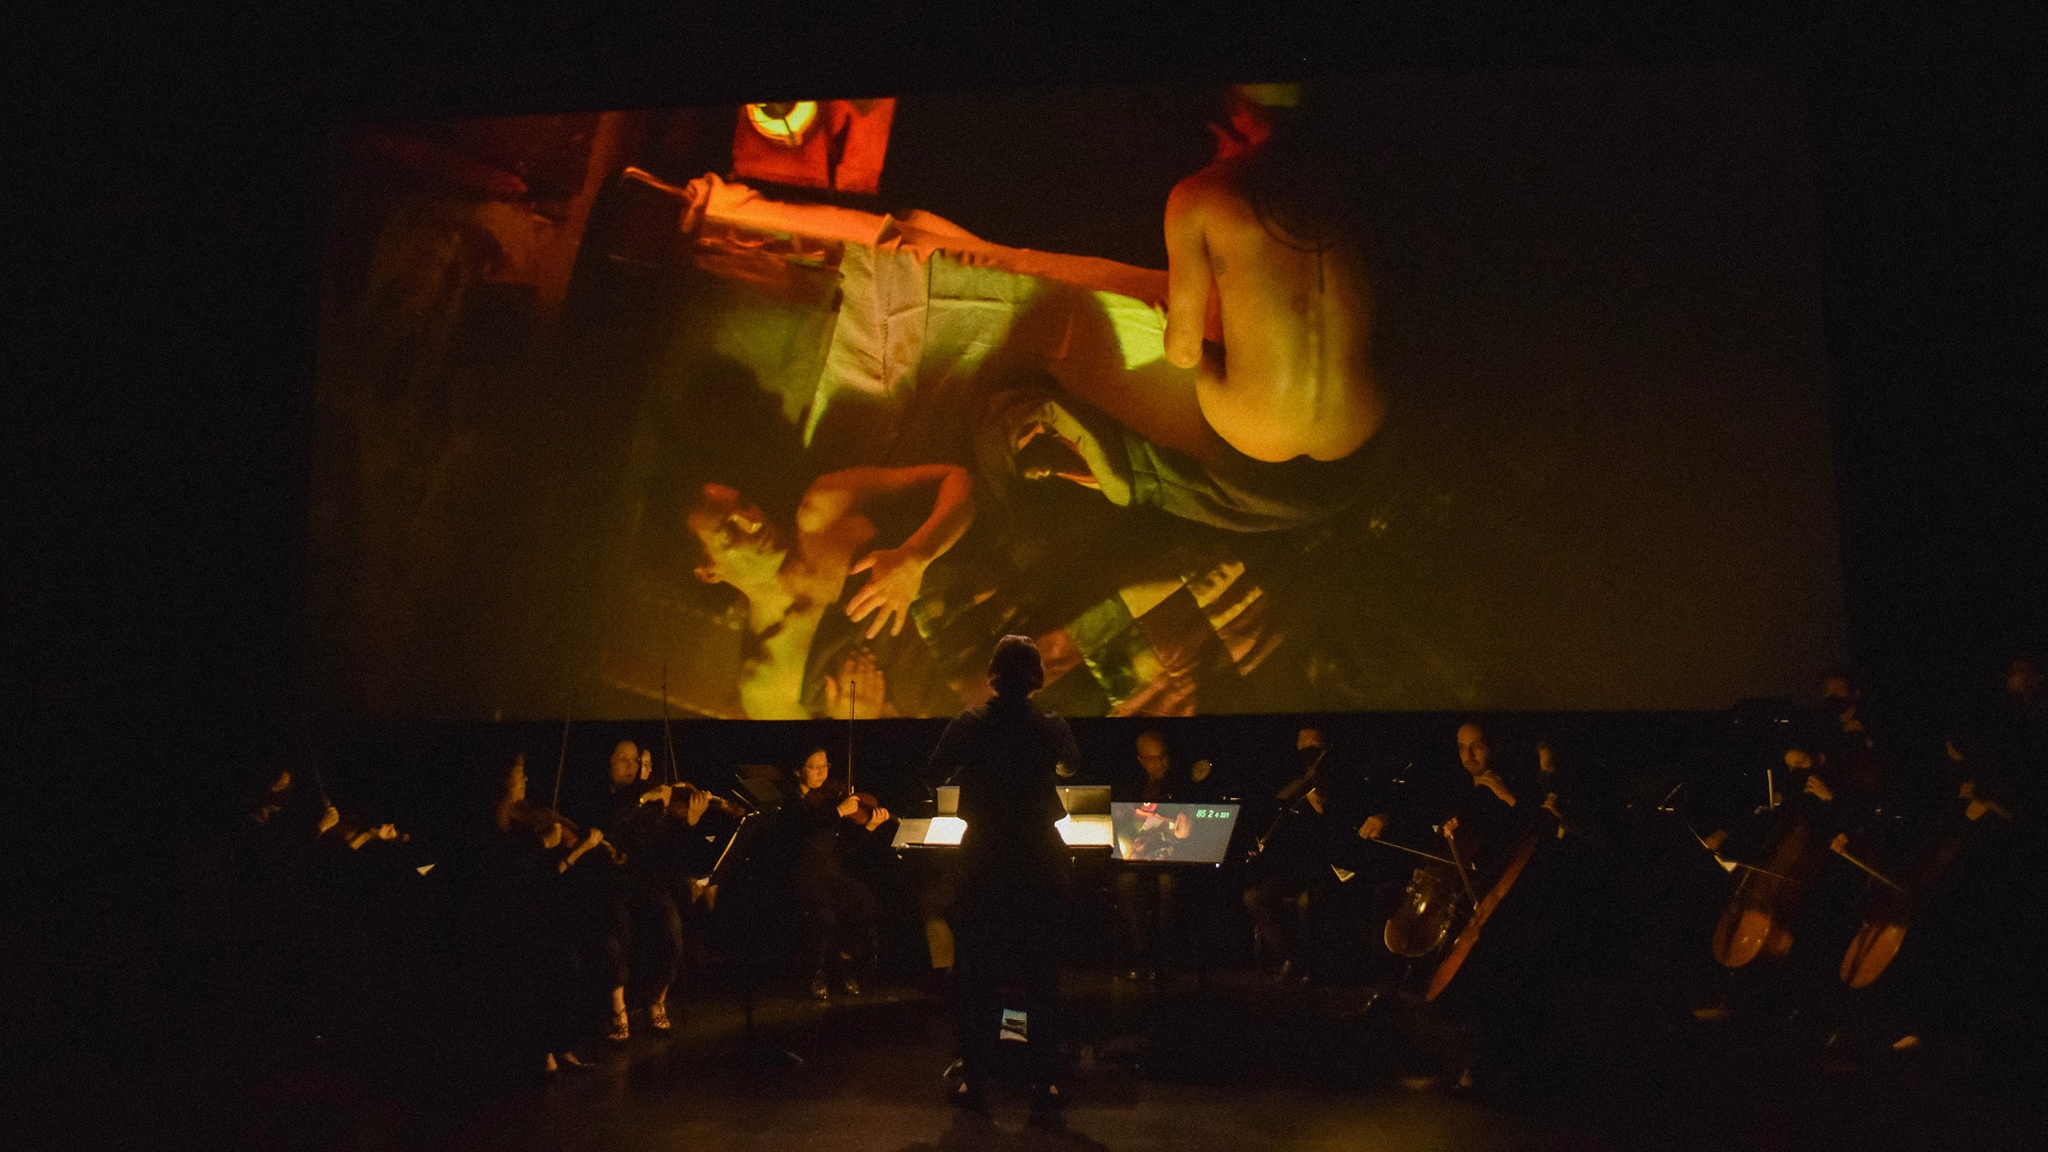 A small orchestra plays in a dark theater space in front of a film screen. On the screen is projected a scene from Wu Tsang's Moby Dick: a naked person sits on the side of a bed while another person still sleeps under a blanket.